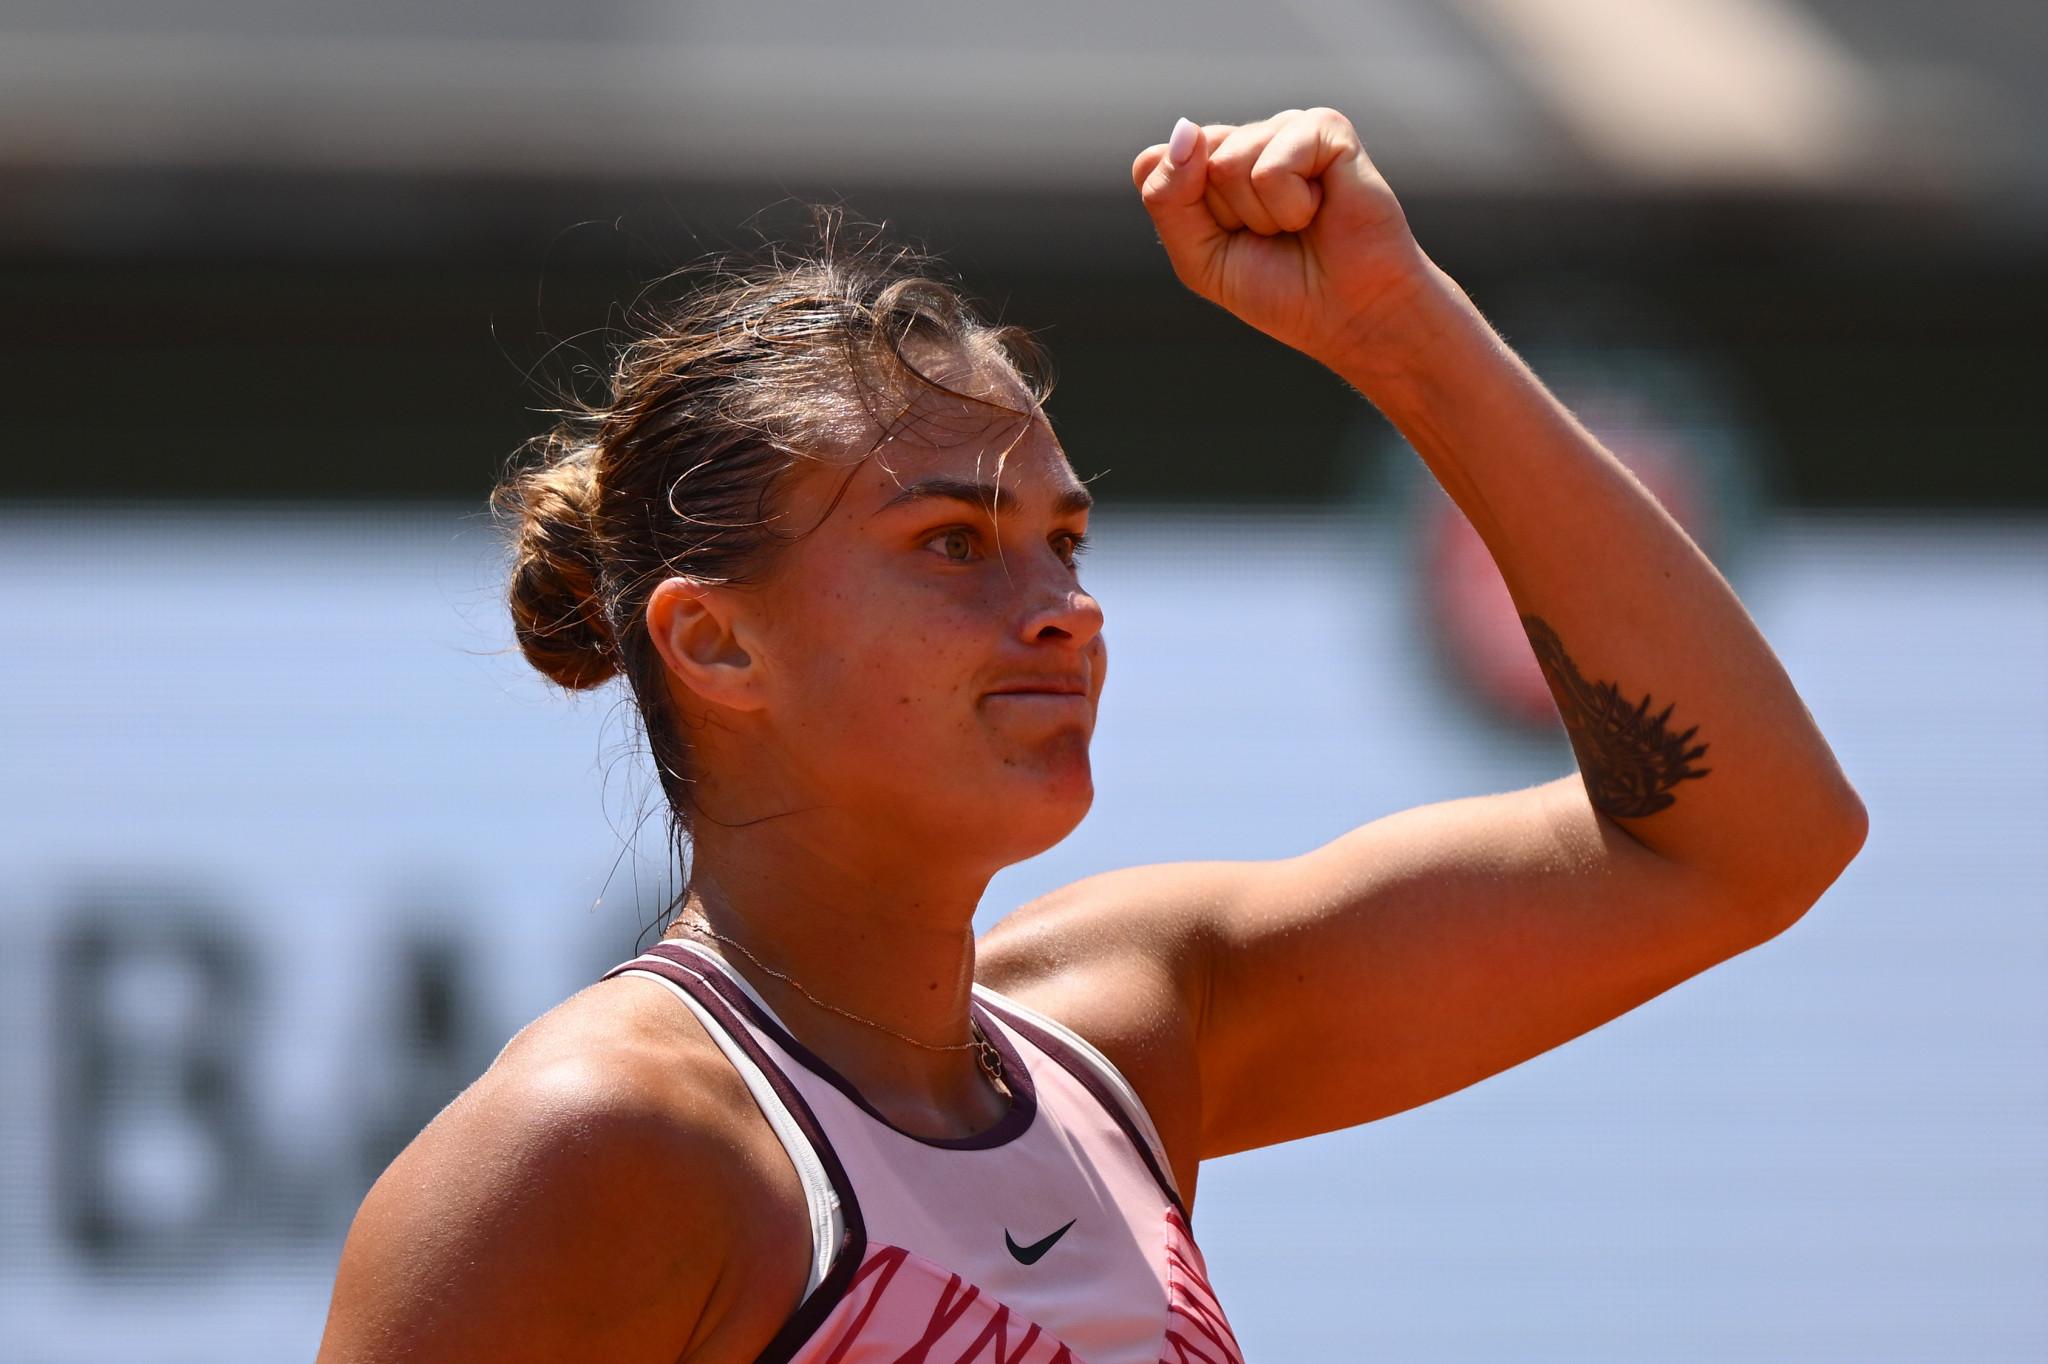 Aryna Sabalenka said she does not support Alexaner Luksahenko "right now" ©Getty Images